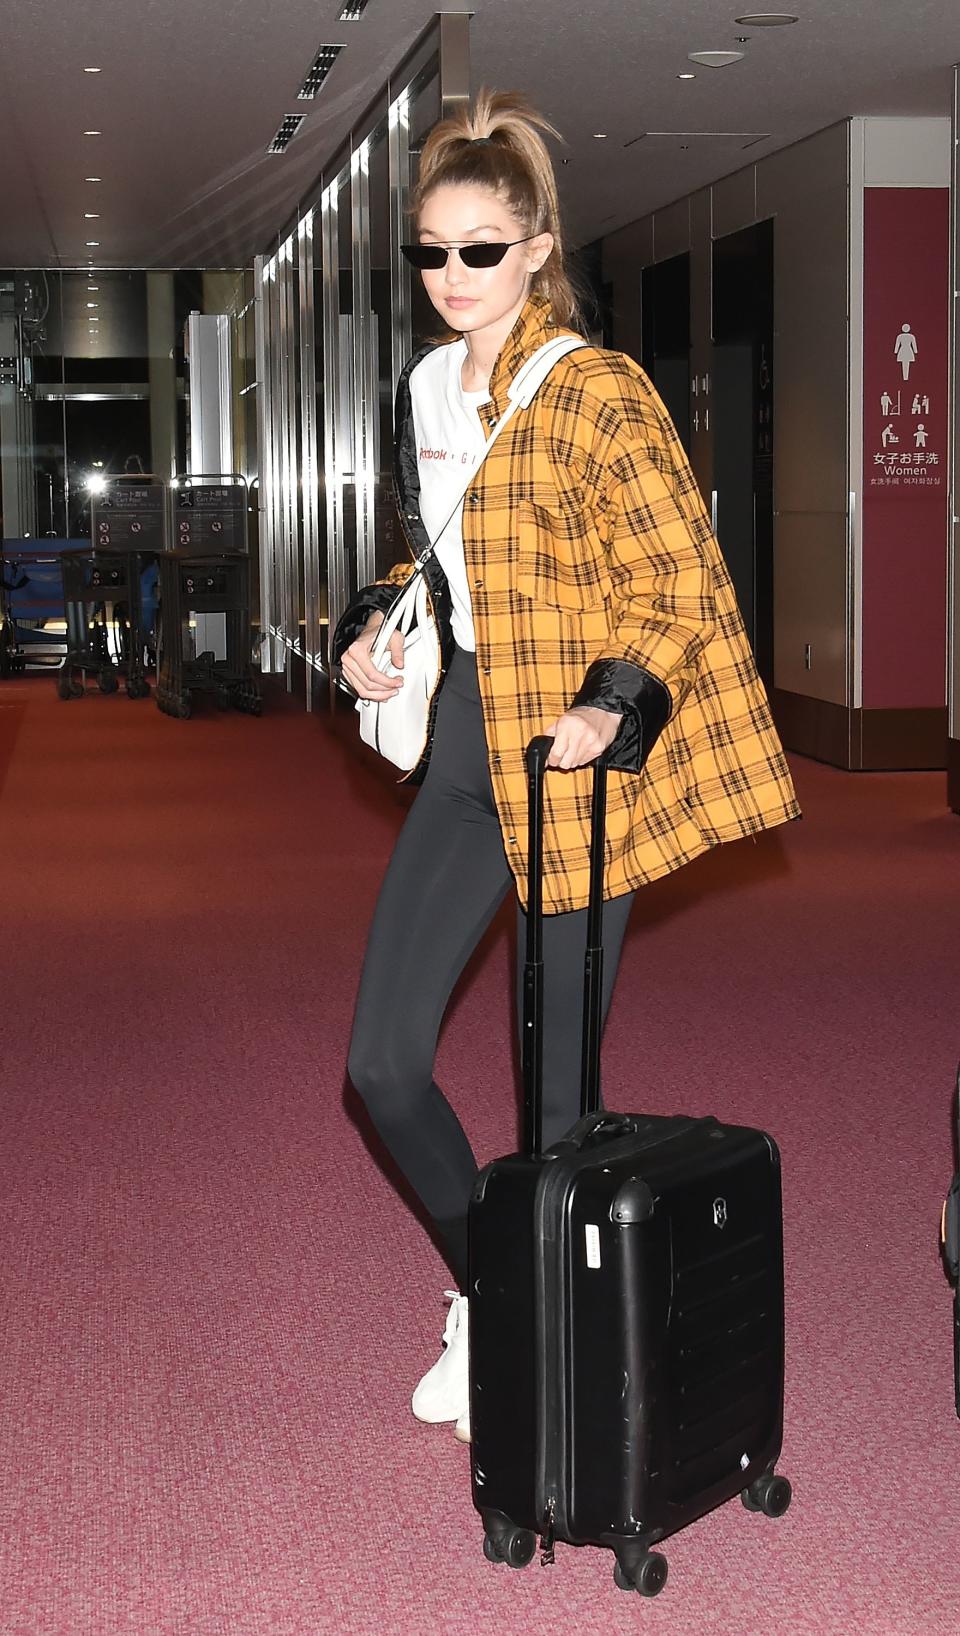 When you're not feeling the denim jacket, take a tip from Gigi Hadid: A plaid blazer is just as light (and dresses up black leggings).